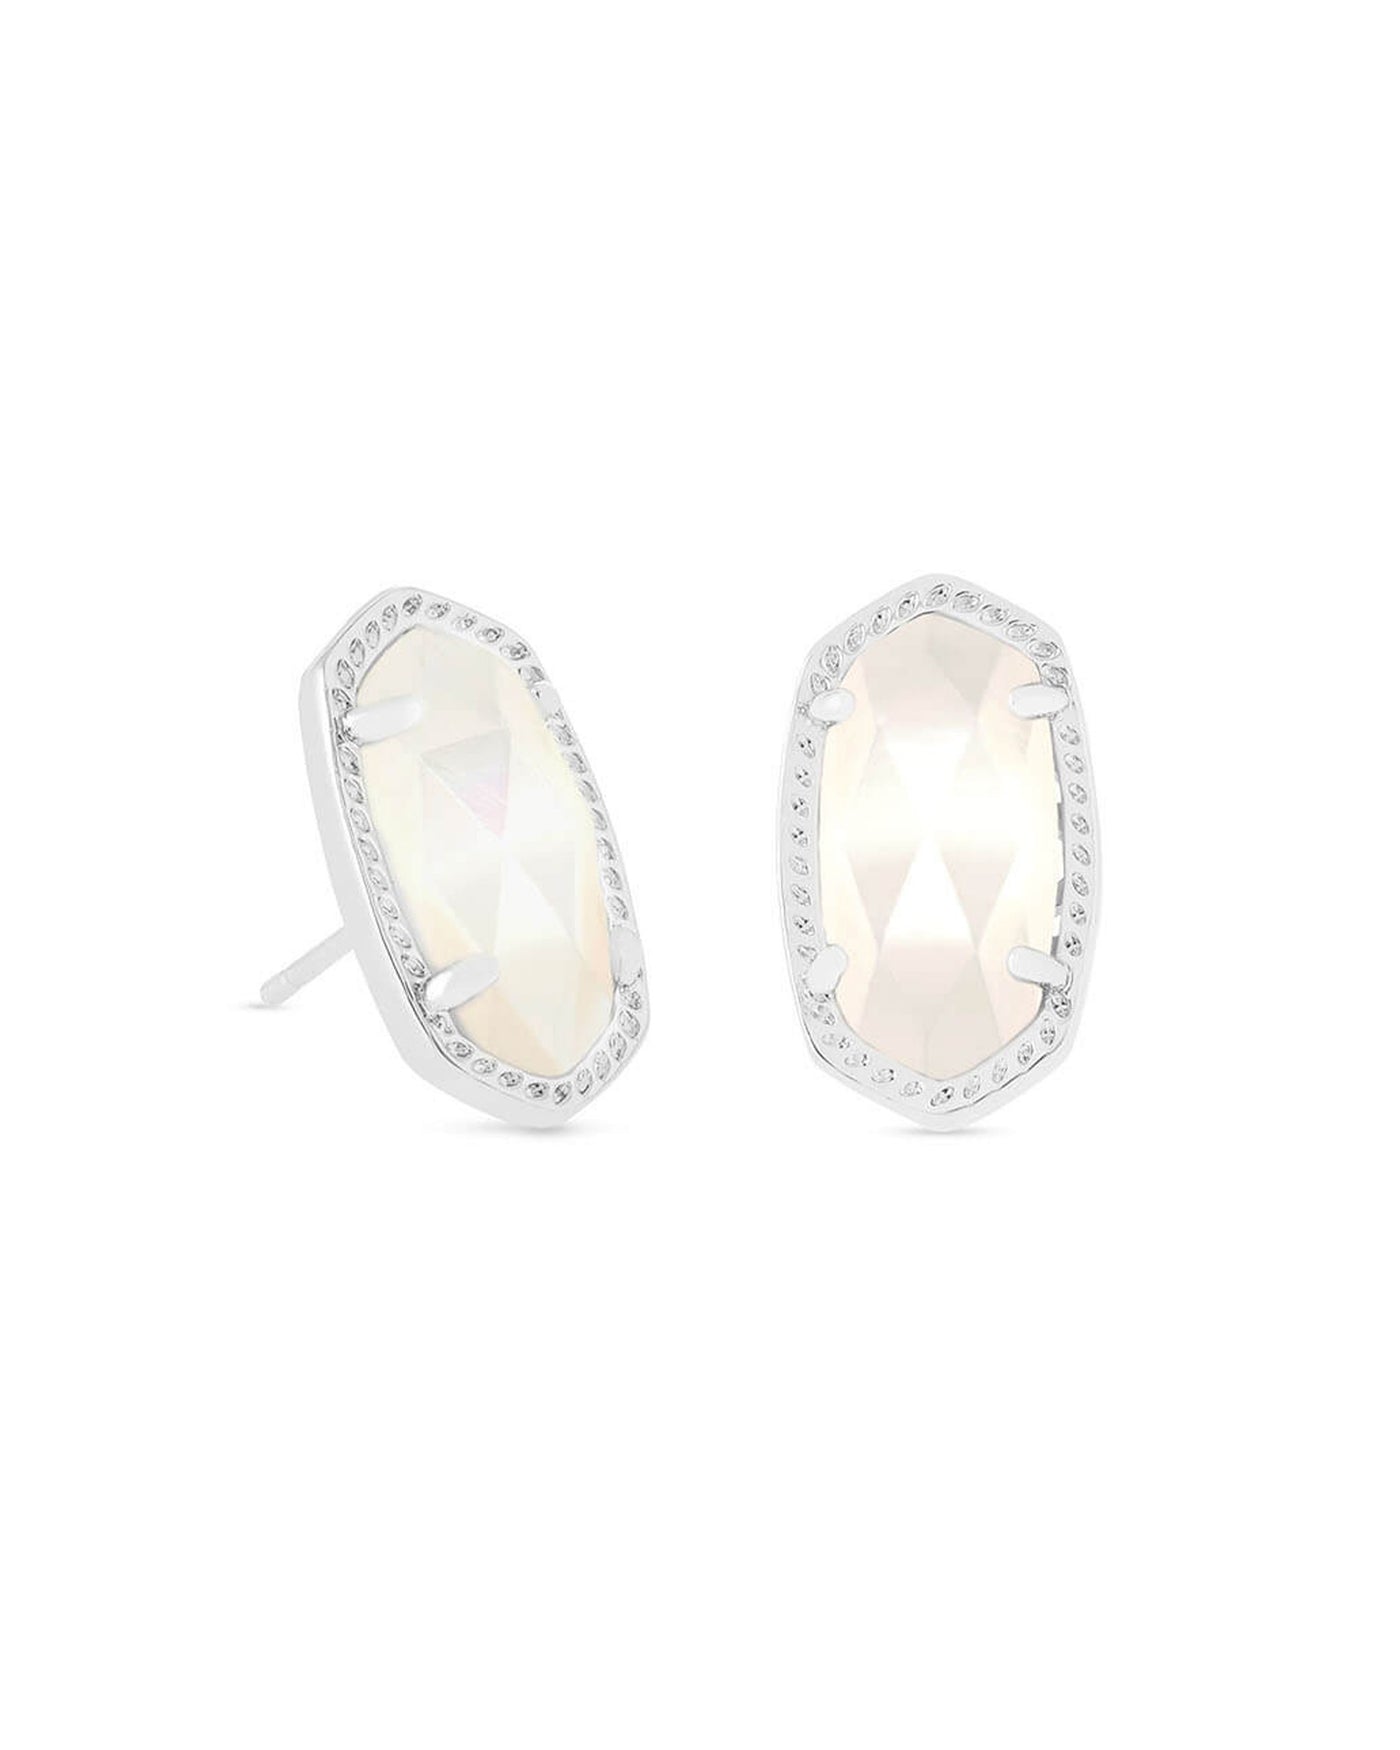 Ellie Stud Earrings Silver Mother of Pearl on white background, front view.